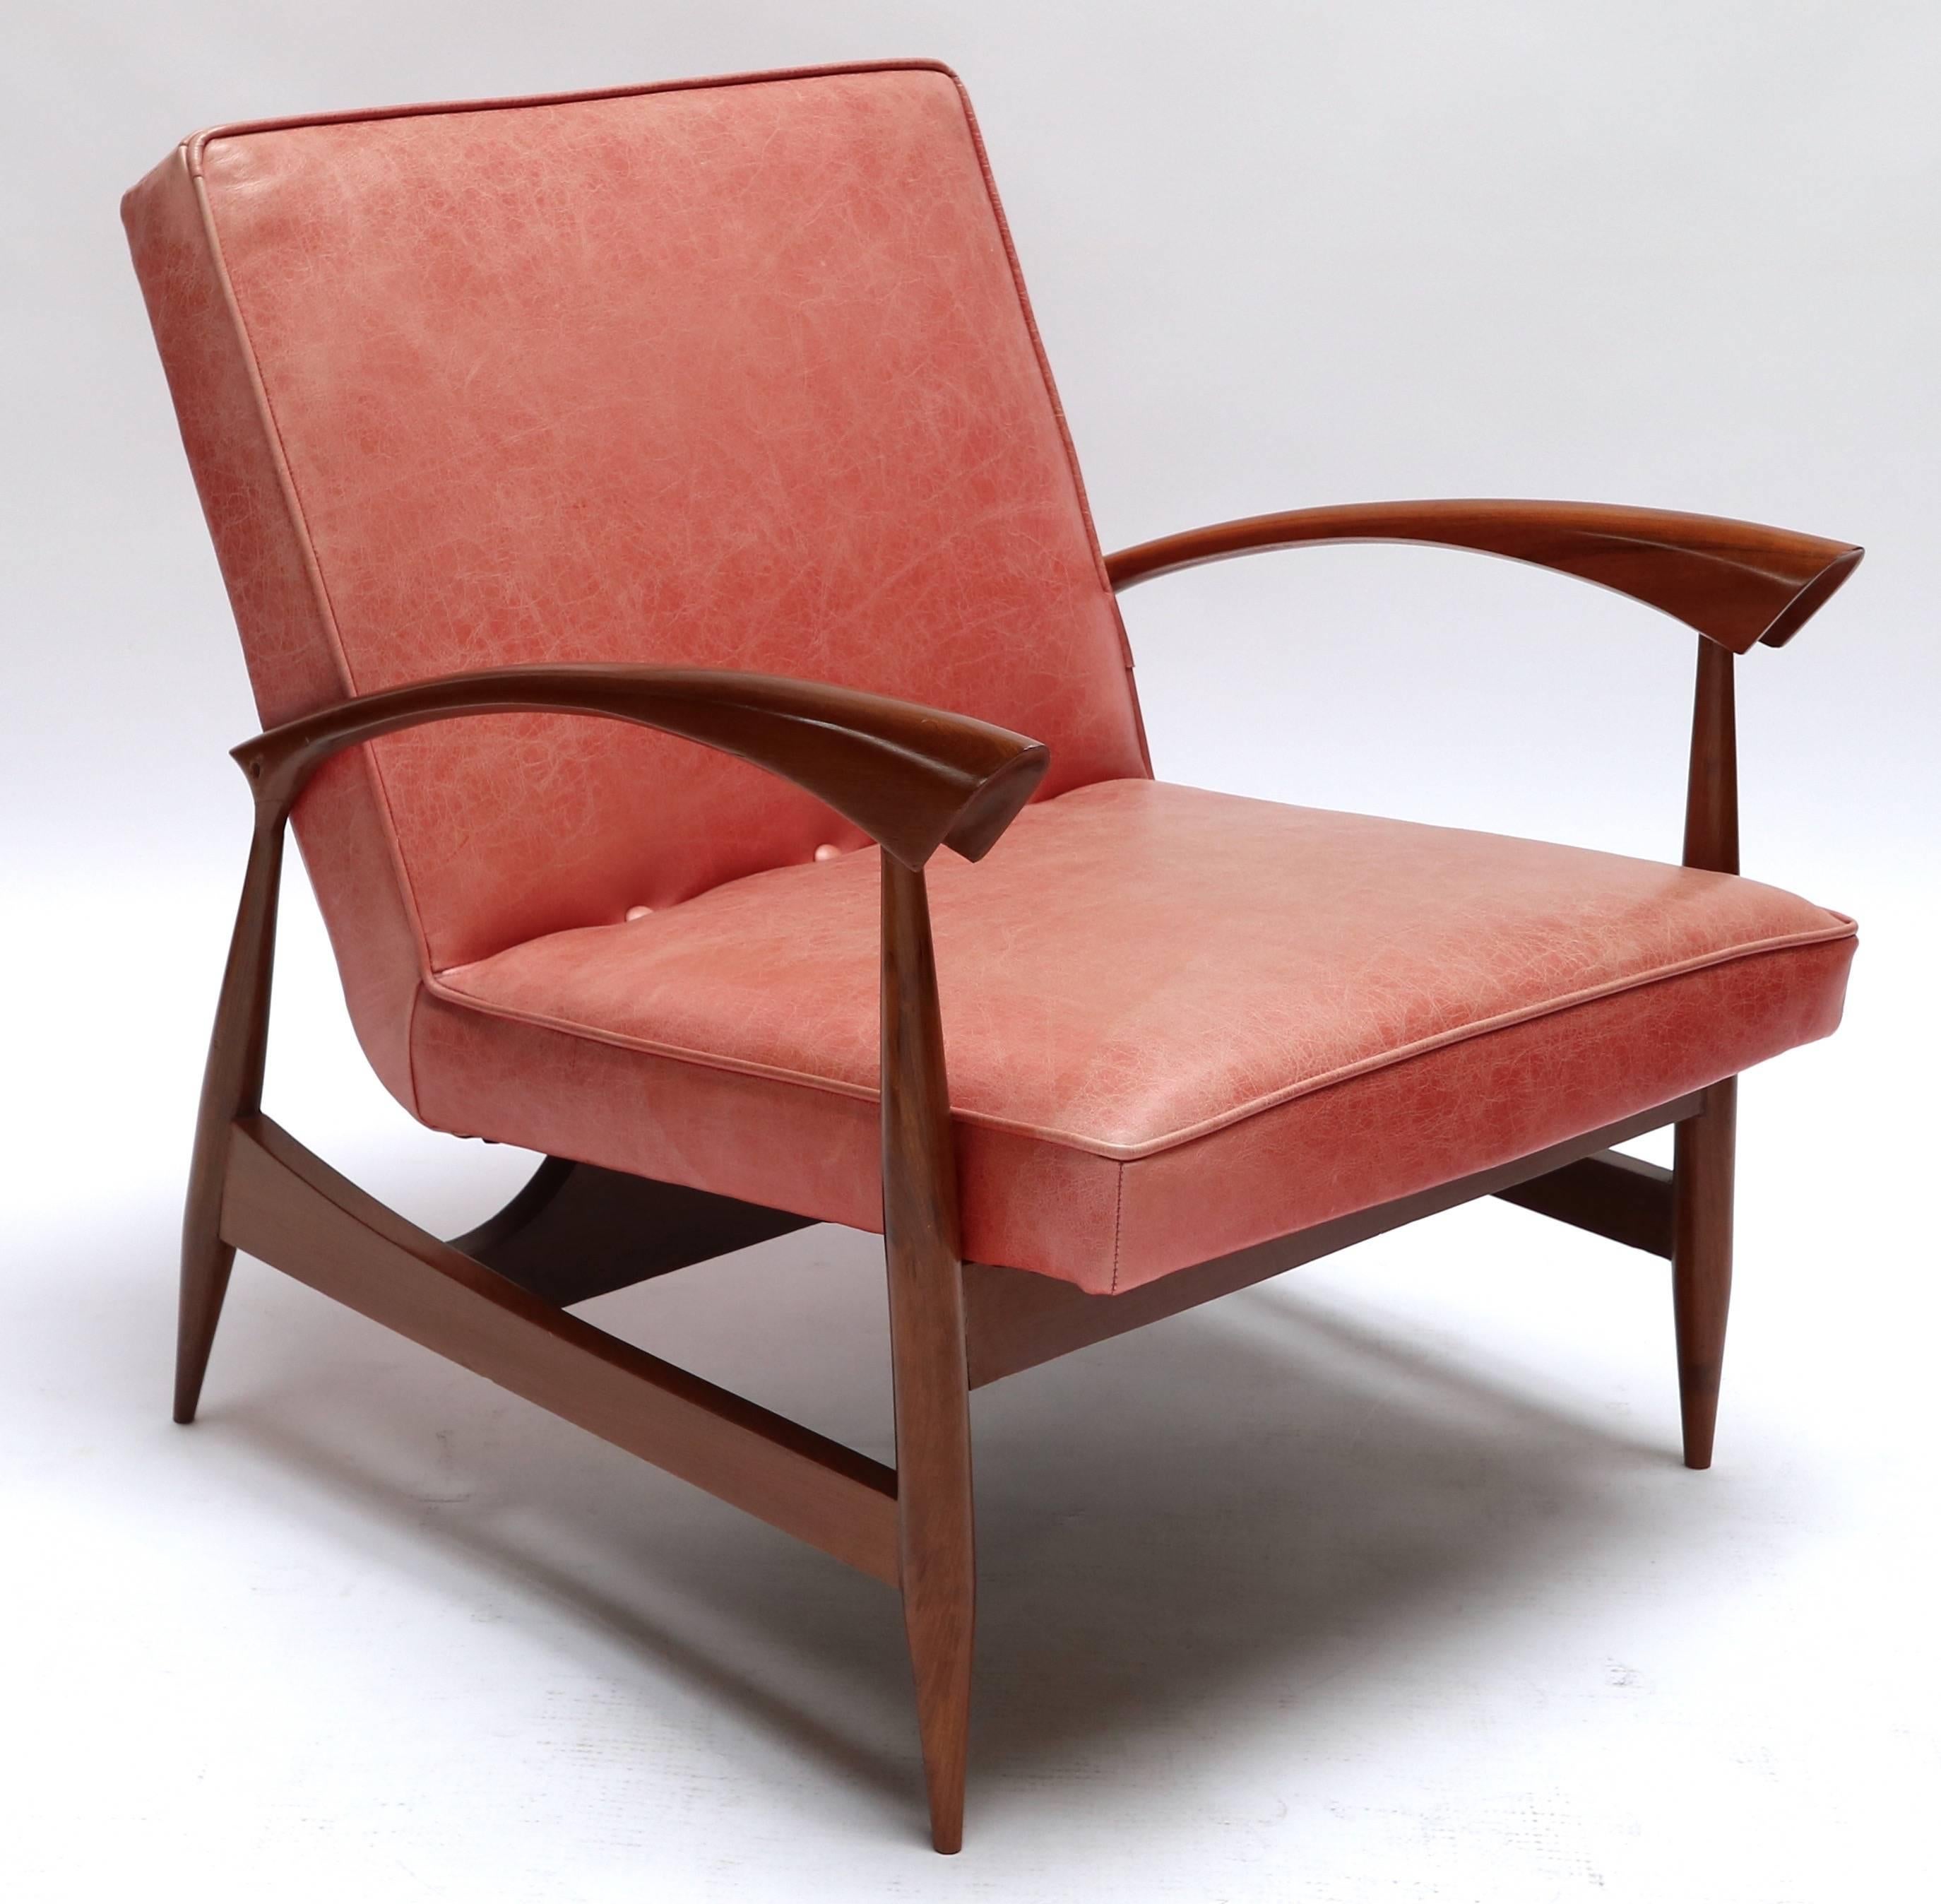 Pair of 1960s Brazilian caviuna armchairs upholstered with leather.